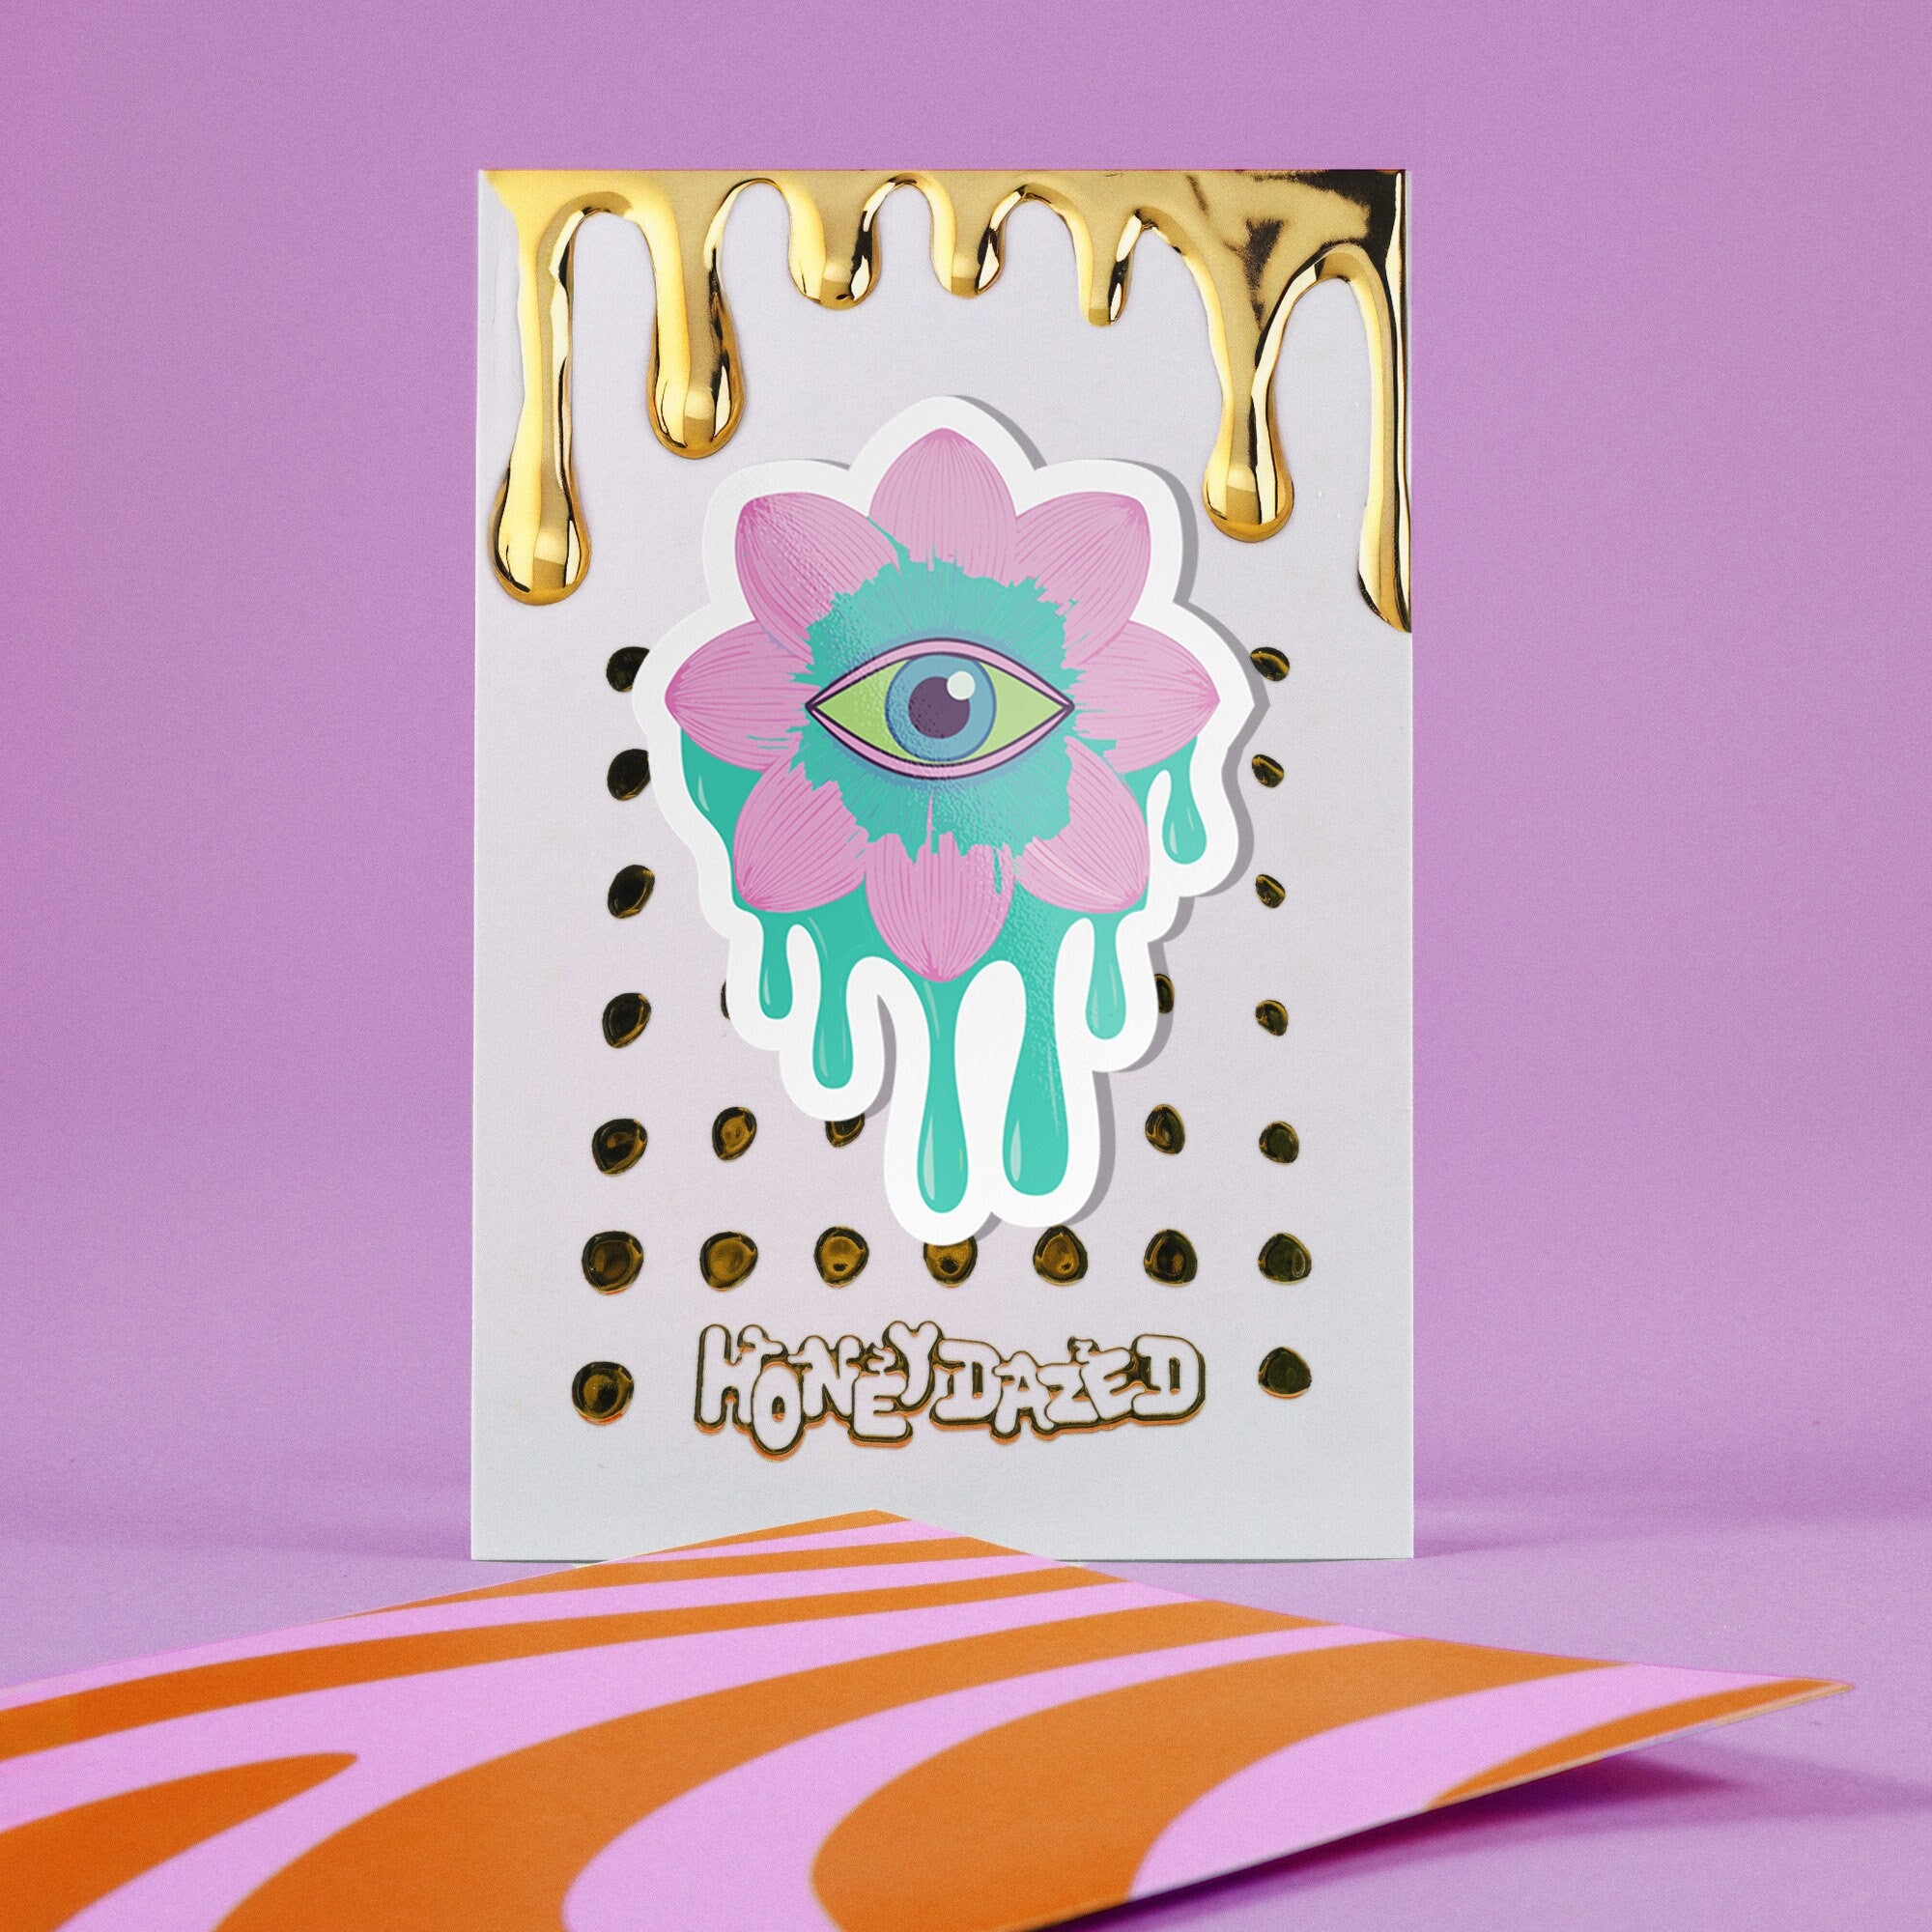 Trippy eyeball flower sticker in pastel pink and green, ideal for quirky and weirdcore enthusiasts. Available in Prism, Gem, and Glitter finishes. Handmade in Austin, Texas.